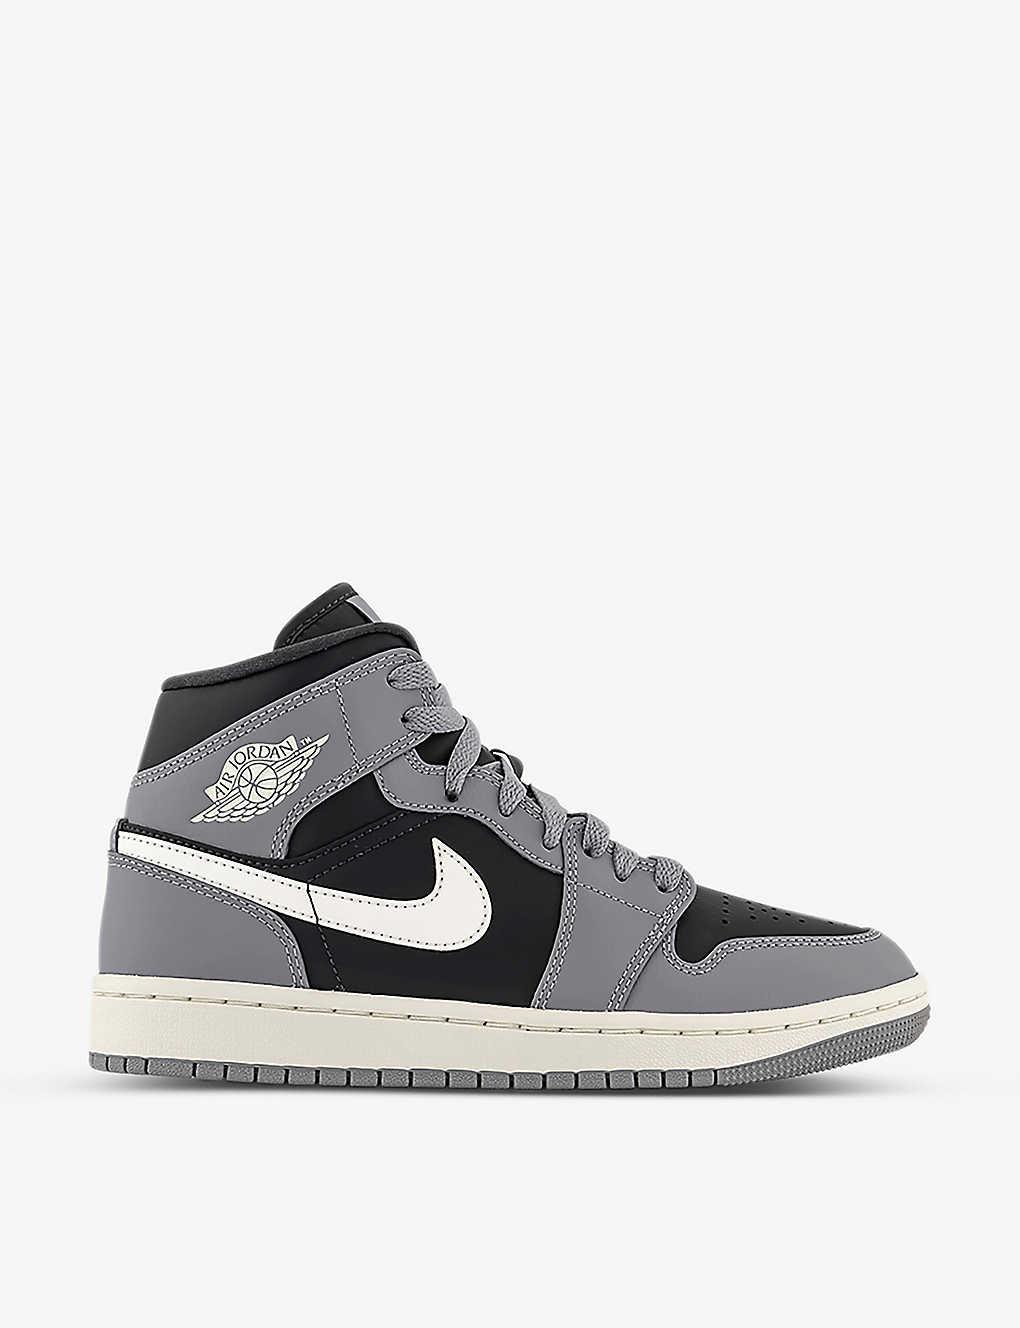 Nike Air Jordan 1 Mid Leather Mid-top Trainers in Gray | Lyst